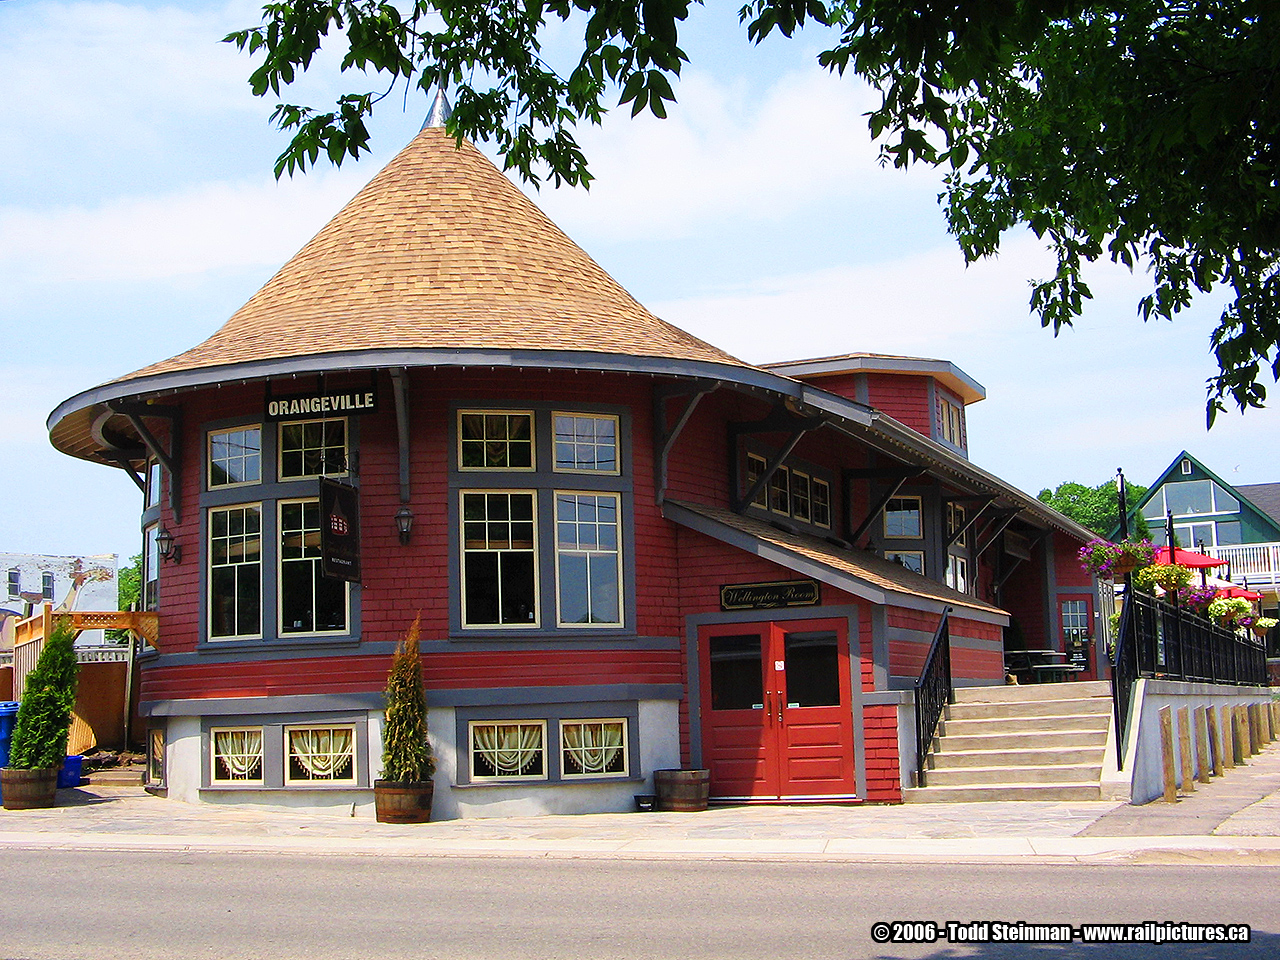 There are only four stations in Ontario today that have the so-called 'Witch's Hat' roofline...ex-CN Wainfleet, ex-CN Blyth, ex-CP Parry Sound and the ex-CP Orangeville station.
 
Now relocated to Armstrong Street and used as the Barley Vine Rail Restaurant, this station has seen it all. Also once used in a divisional point, it became a restaurant and I have the pleasure to say I ate there on my first visit in 2003. It was an Italian eatery then, and the food was exceptional.

Disaster struck a short time after as fire ripped through the station and destroyed the roof. Rebuilt, it housed a Sushi place upon this visit in 2006. 

Thankfully, that was short lived and it became a fancier eatery sometime later, and was even on the popular Food Network TV show "You Gotta Eat Here". Glad to see it is a popular stopping place again.